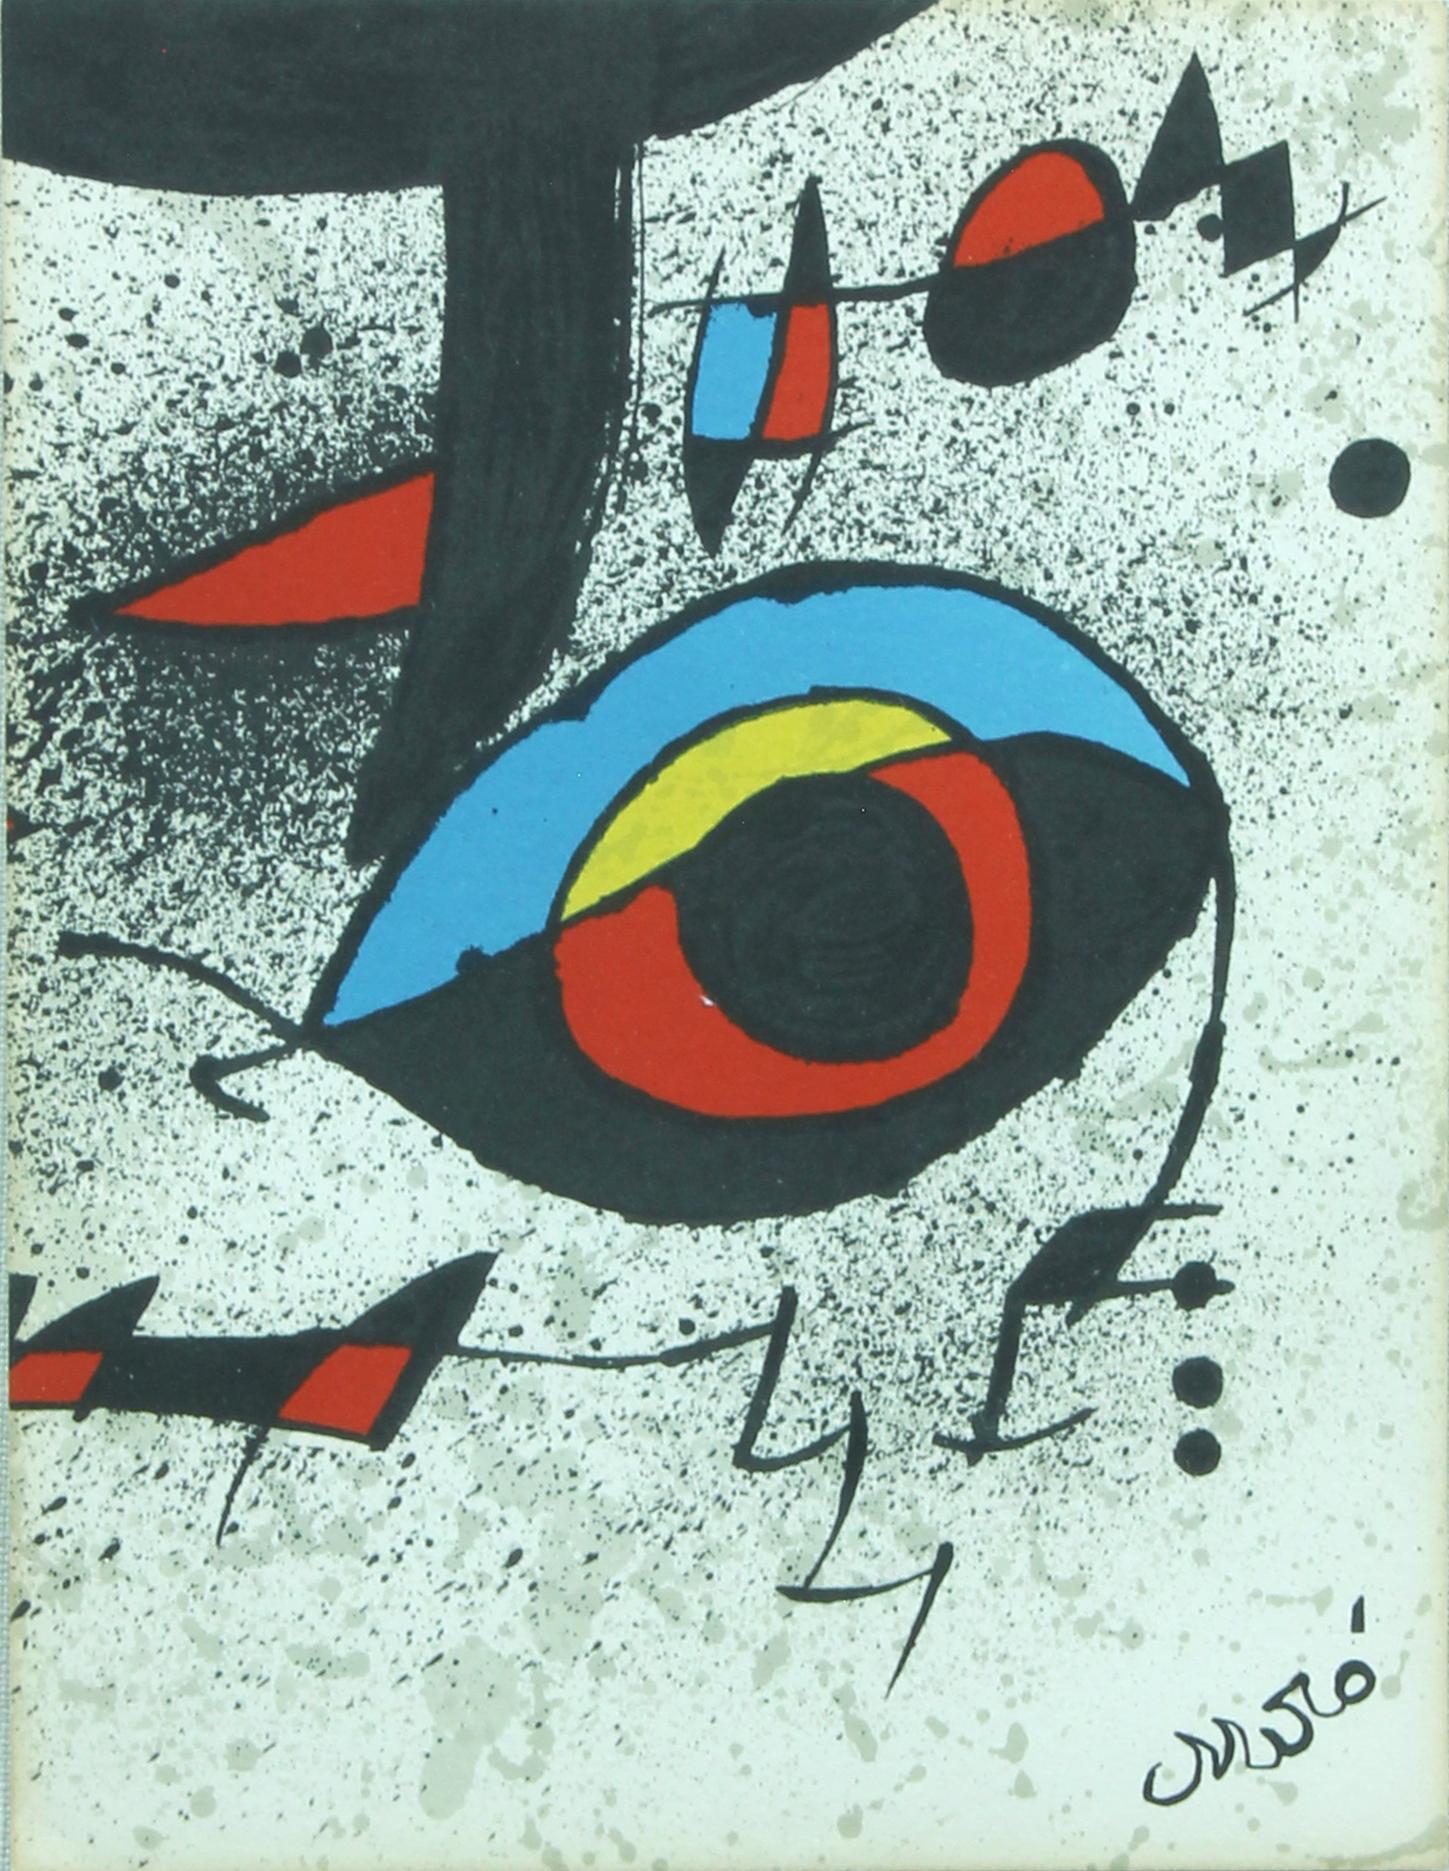 Untitled plate-signed lithograph by Joan Miro. - Print by Joan Miró